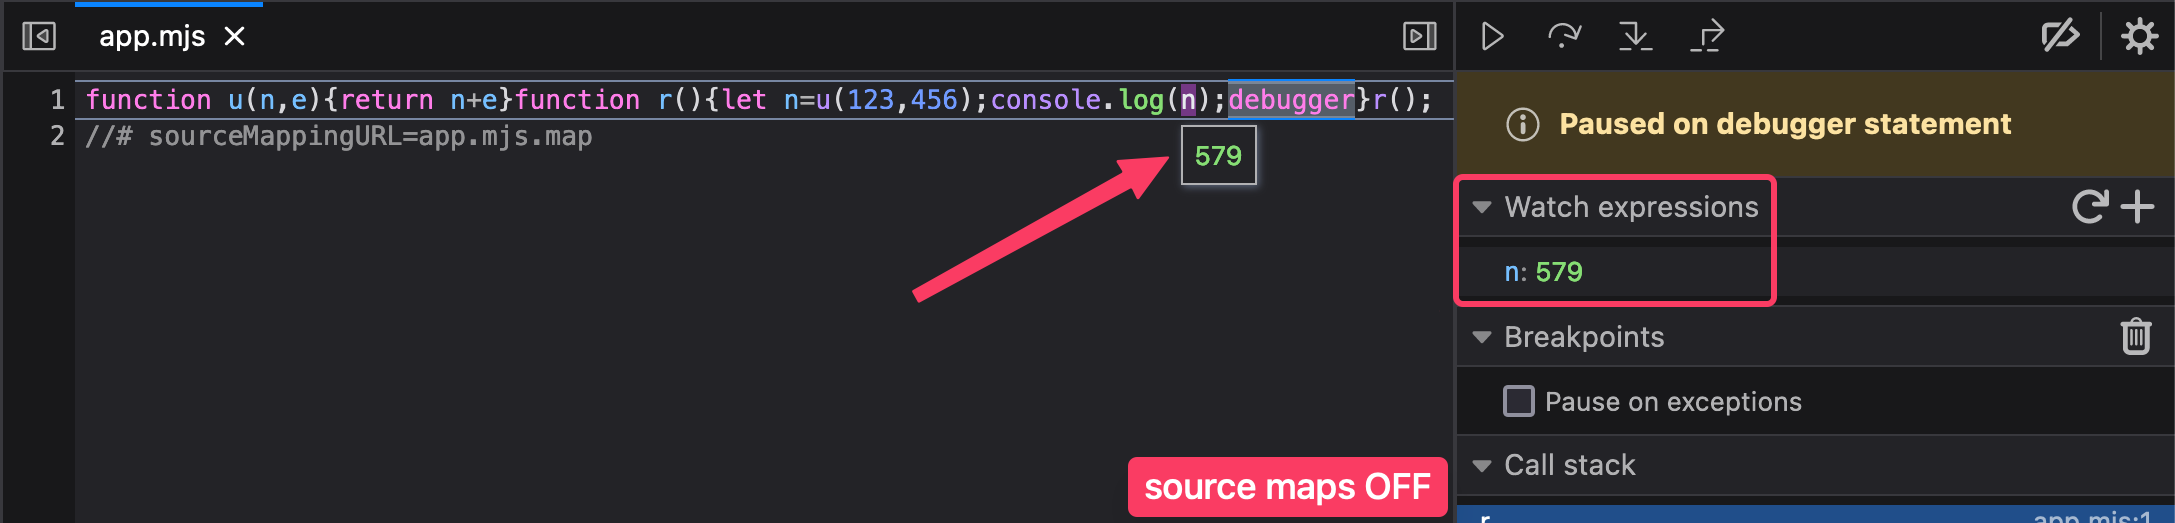 Screenshot of the Firefox debugger with source maps off